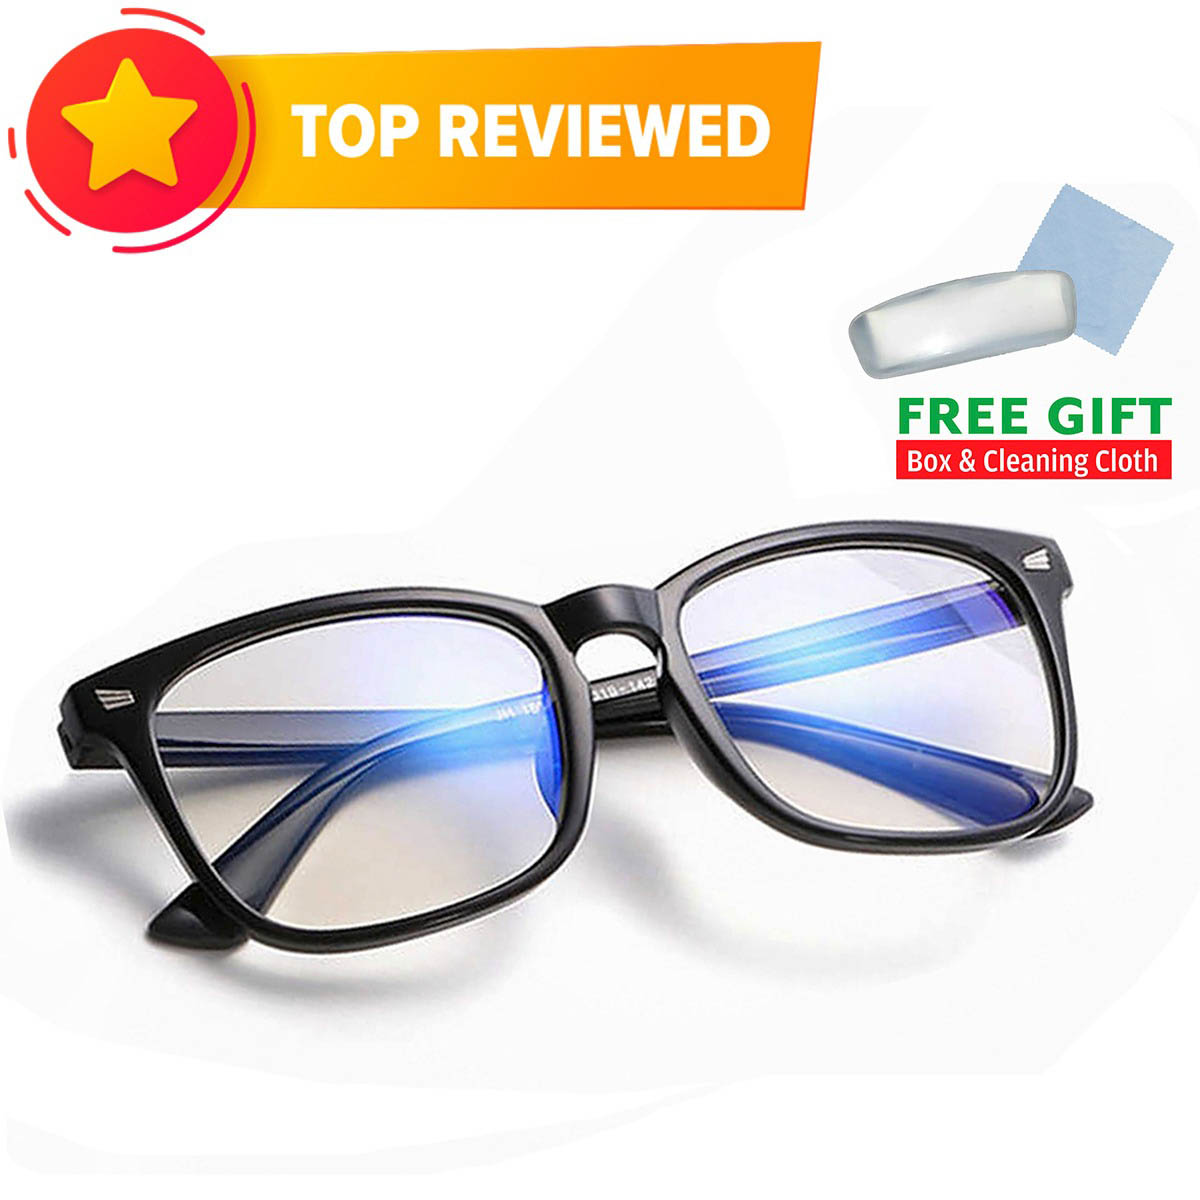 Buy Computer glasses at Best Price in Bangladesh